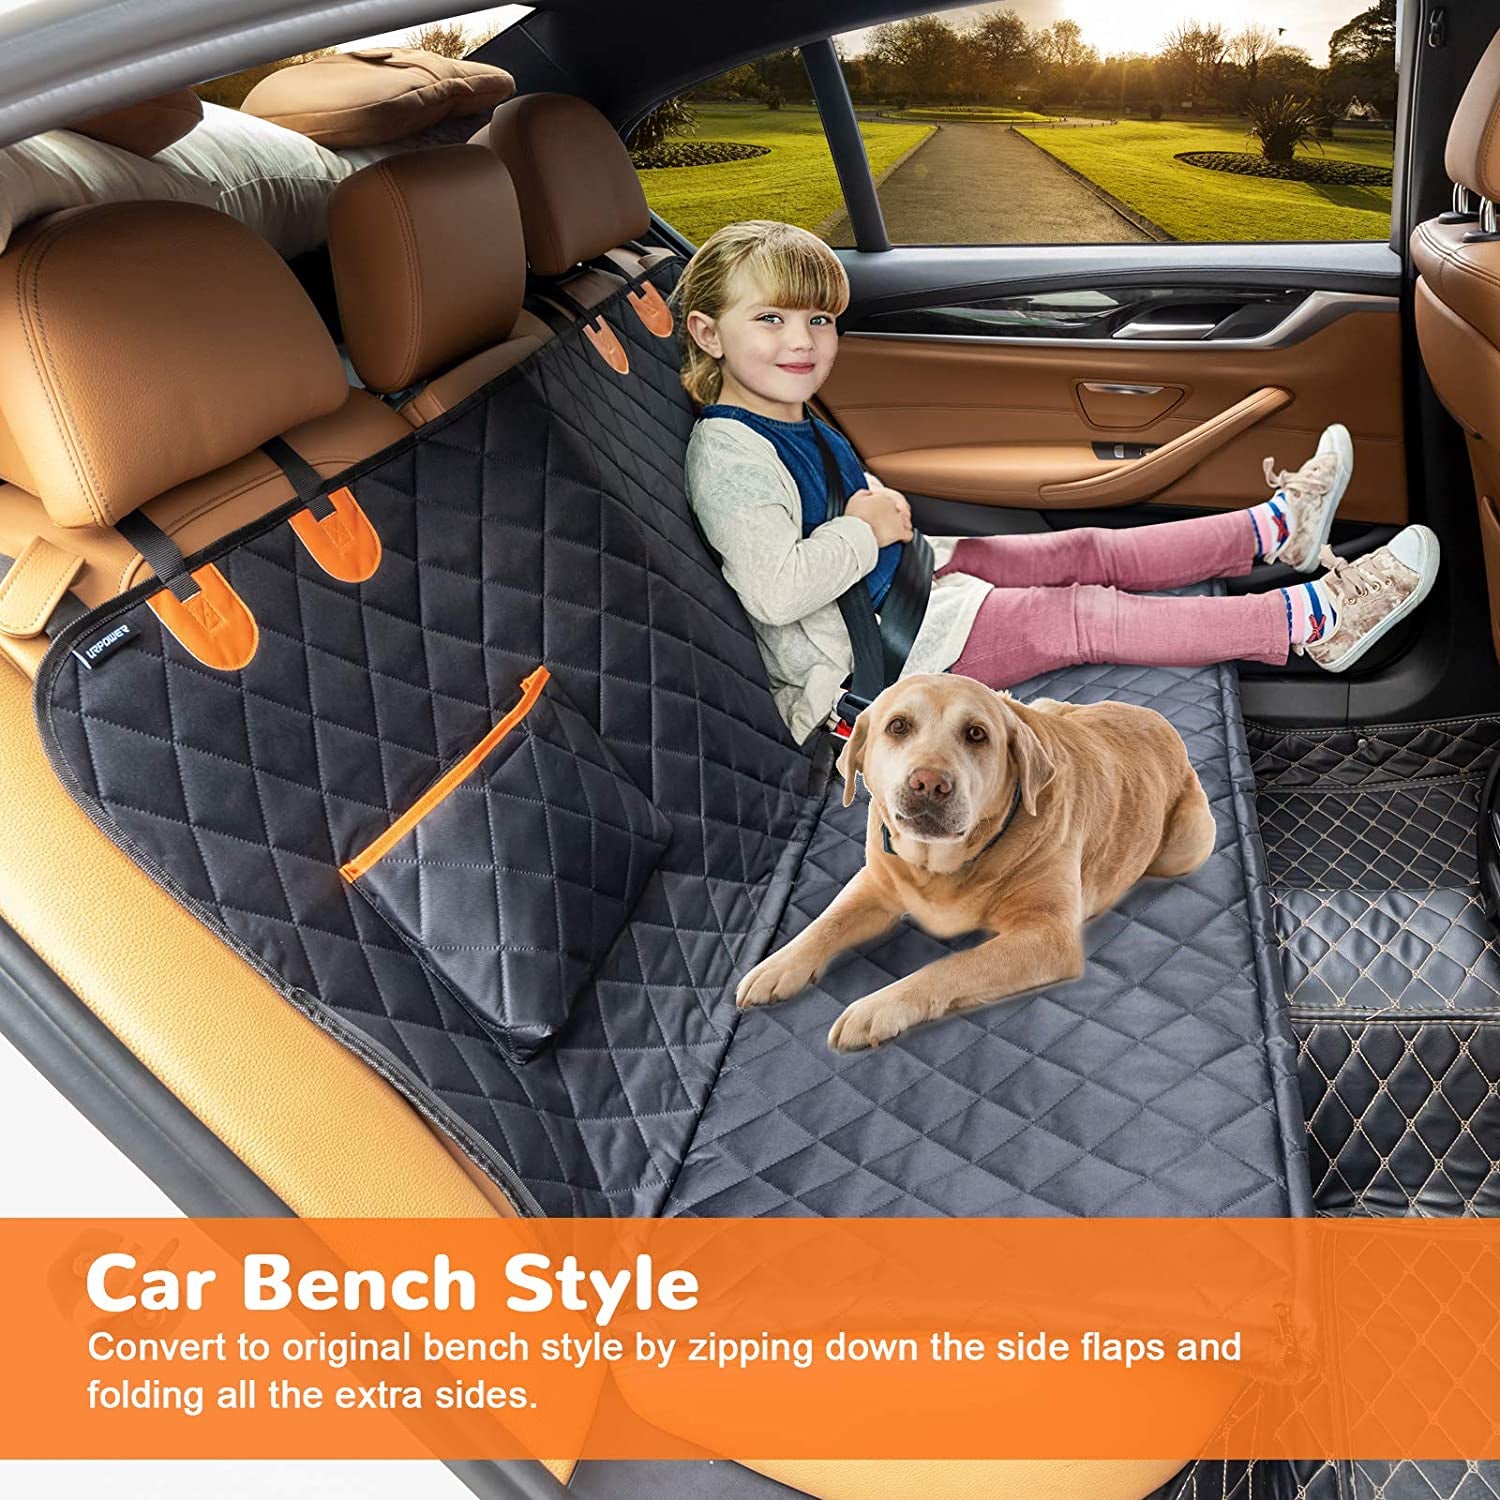 Dog Seat Cover Car Seat Cover for Pets 100%Waterproof Pet Seat Cover Hammock 600D Heavy Duty Scratch Proof Nonslip Durable Soft Pet Back Seat Covers for Cars Trucks and Suvs